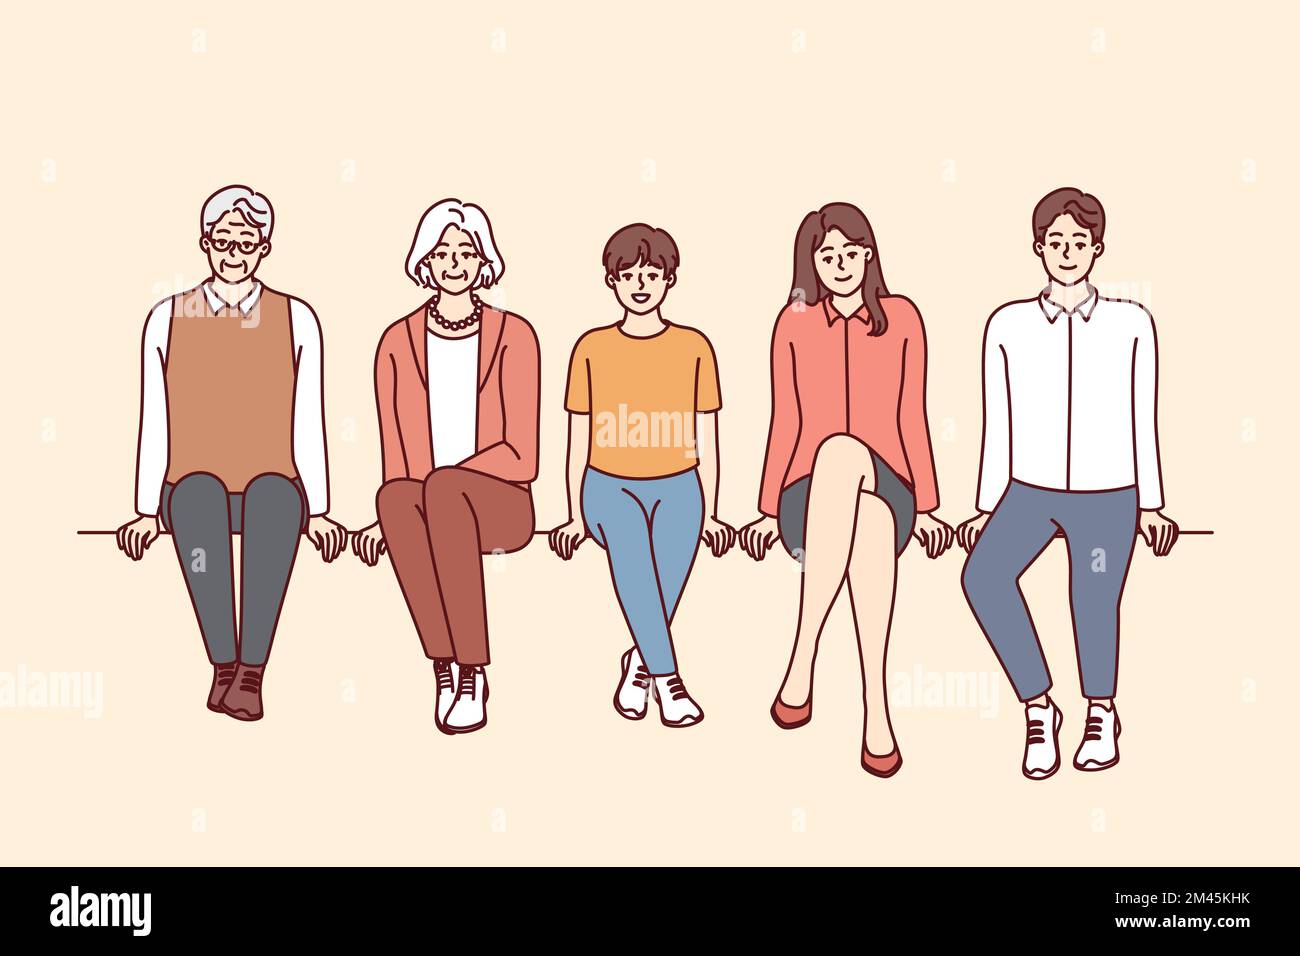 People of different ages dressed in casual style sit in row and look at screen. Young and old men and women from one big family spend time together with smile. Flat vector illustration Stock Vector